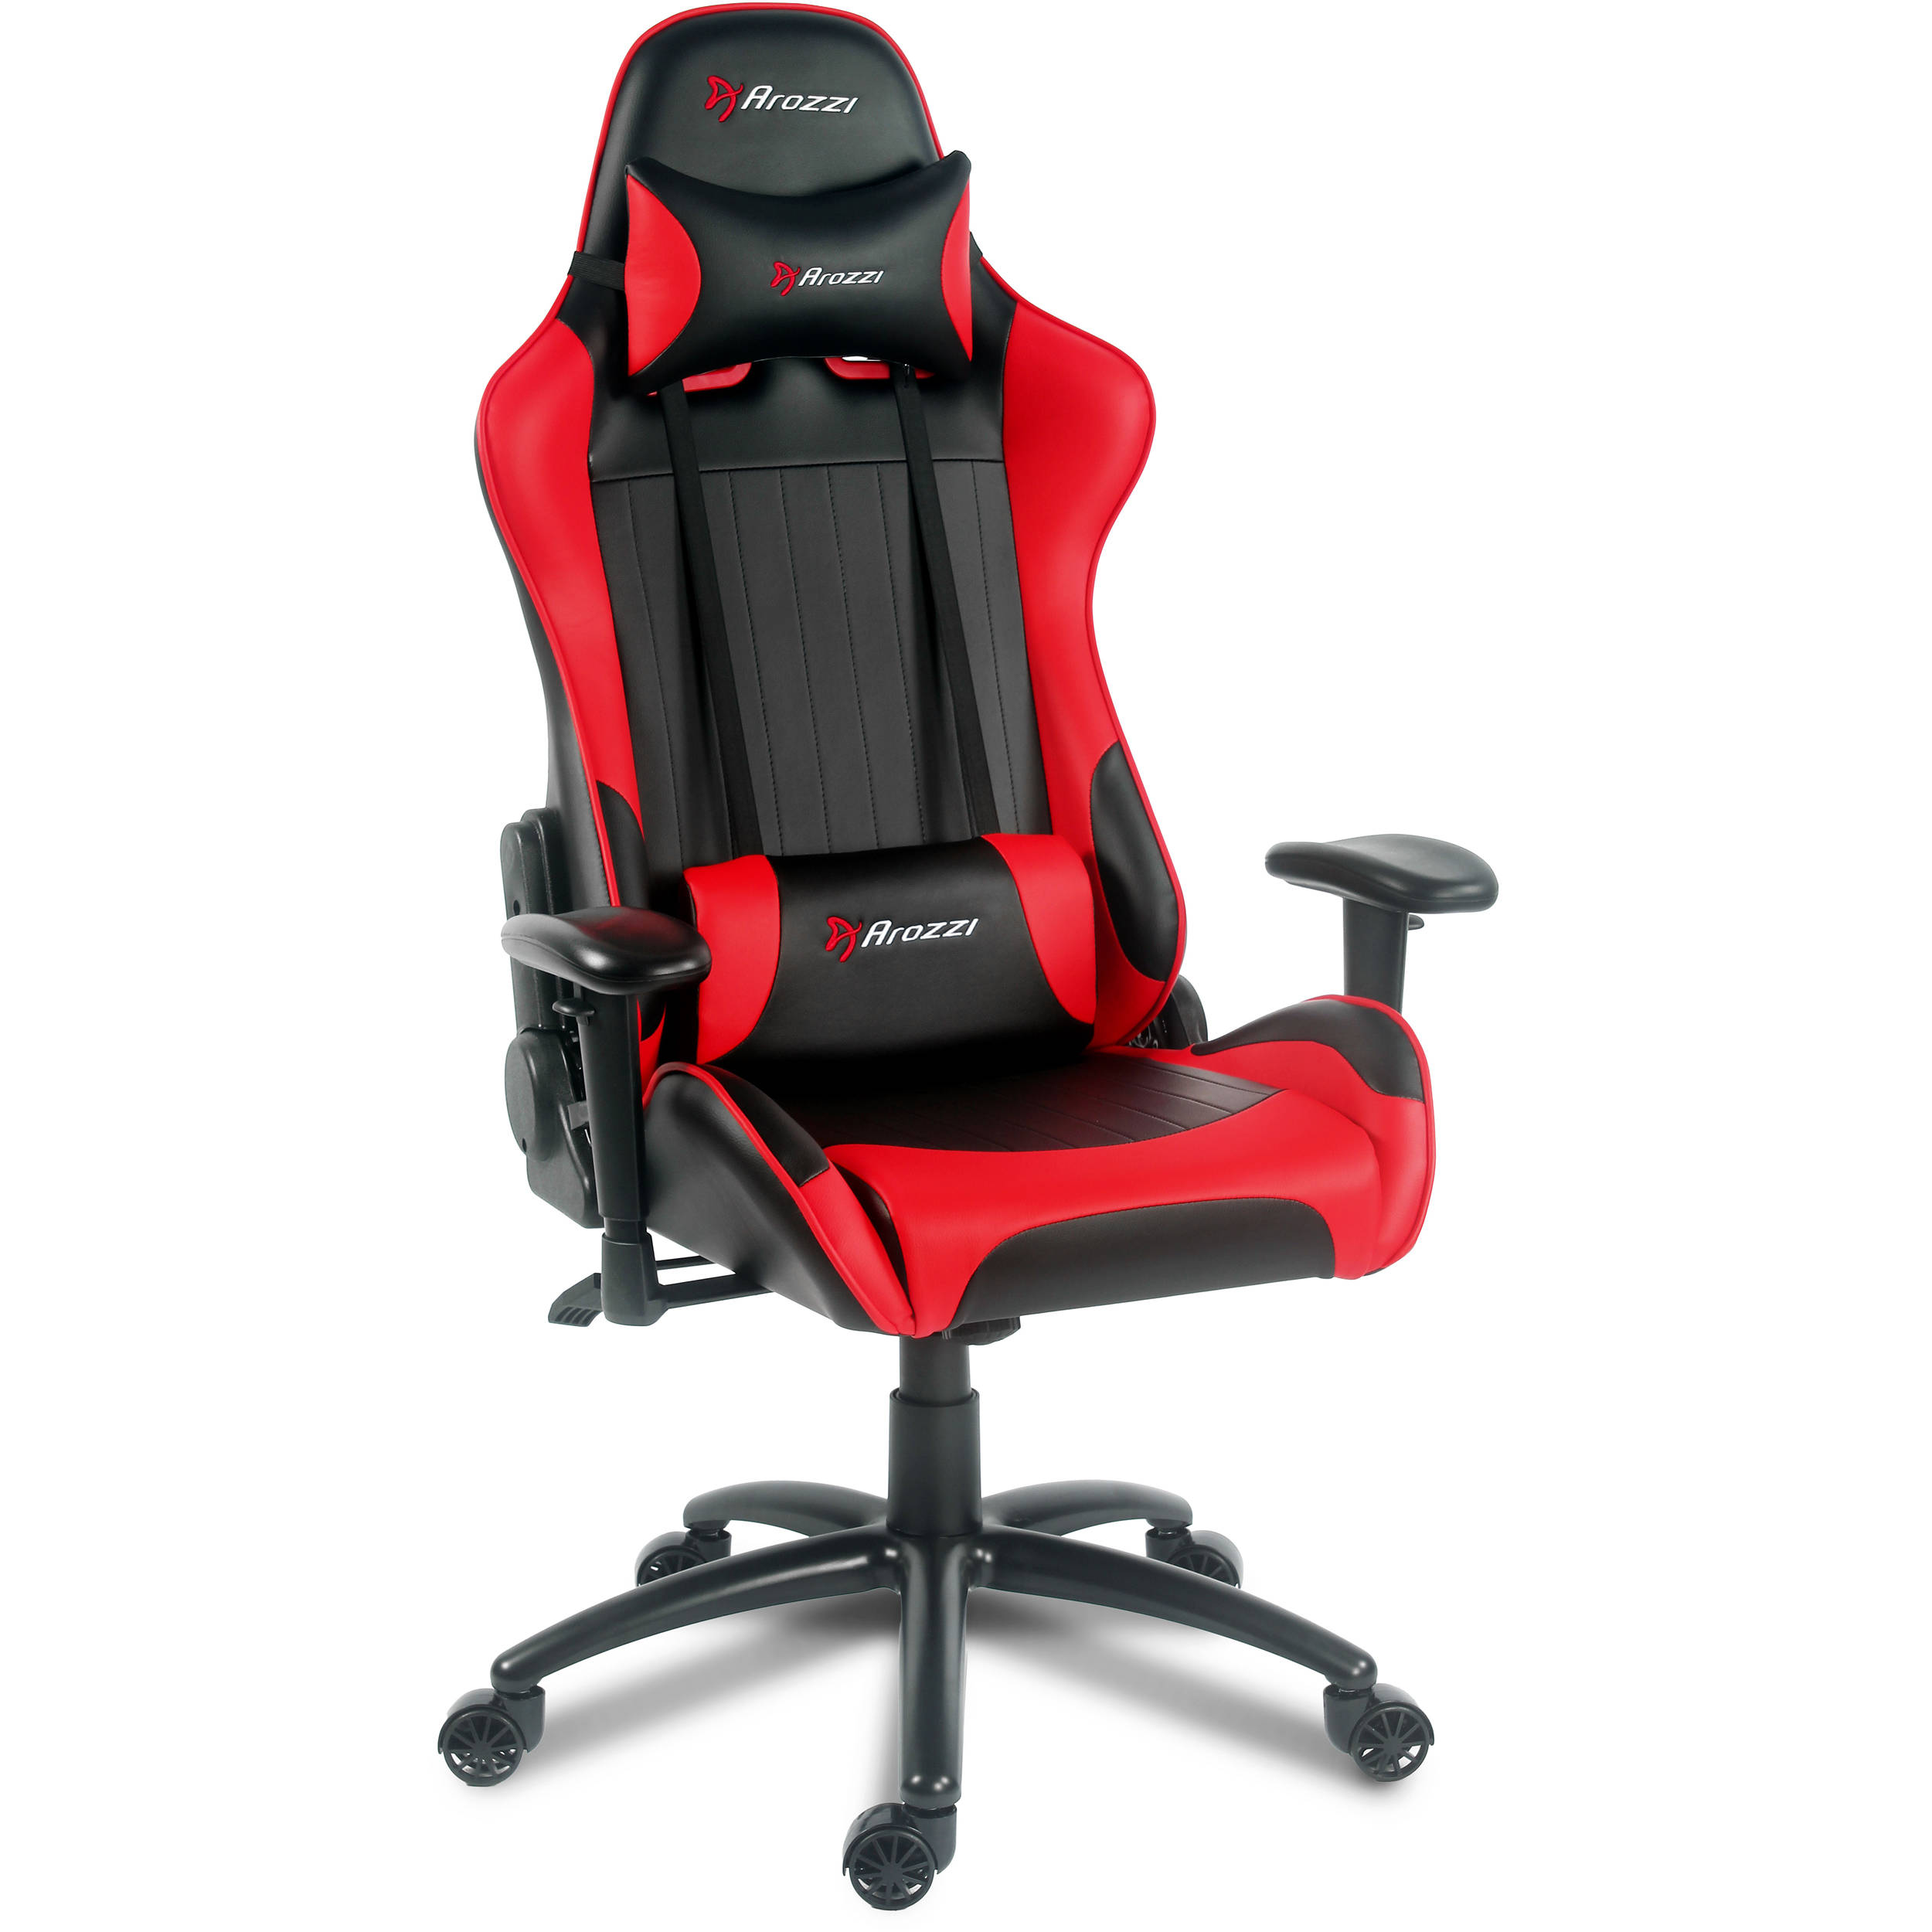 red gaming chair arozzi verona rd verona gaming chair red